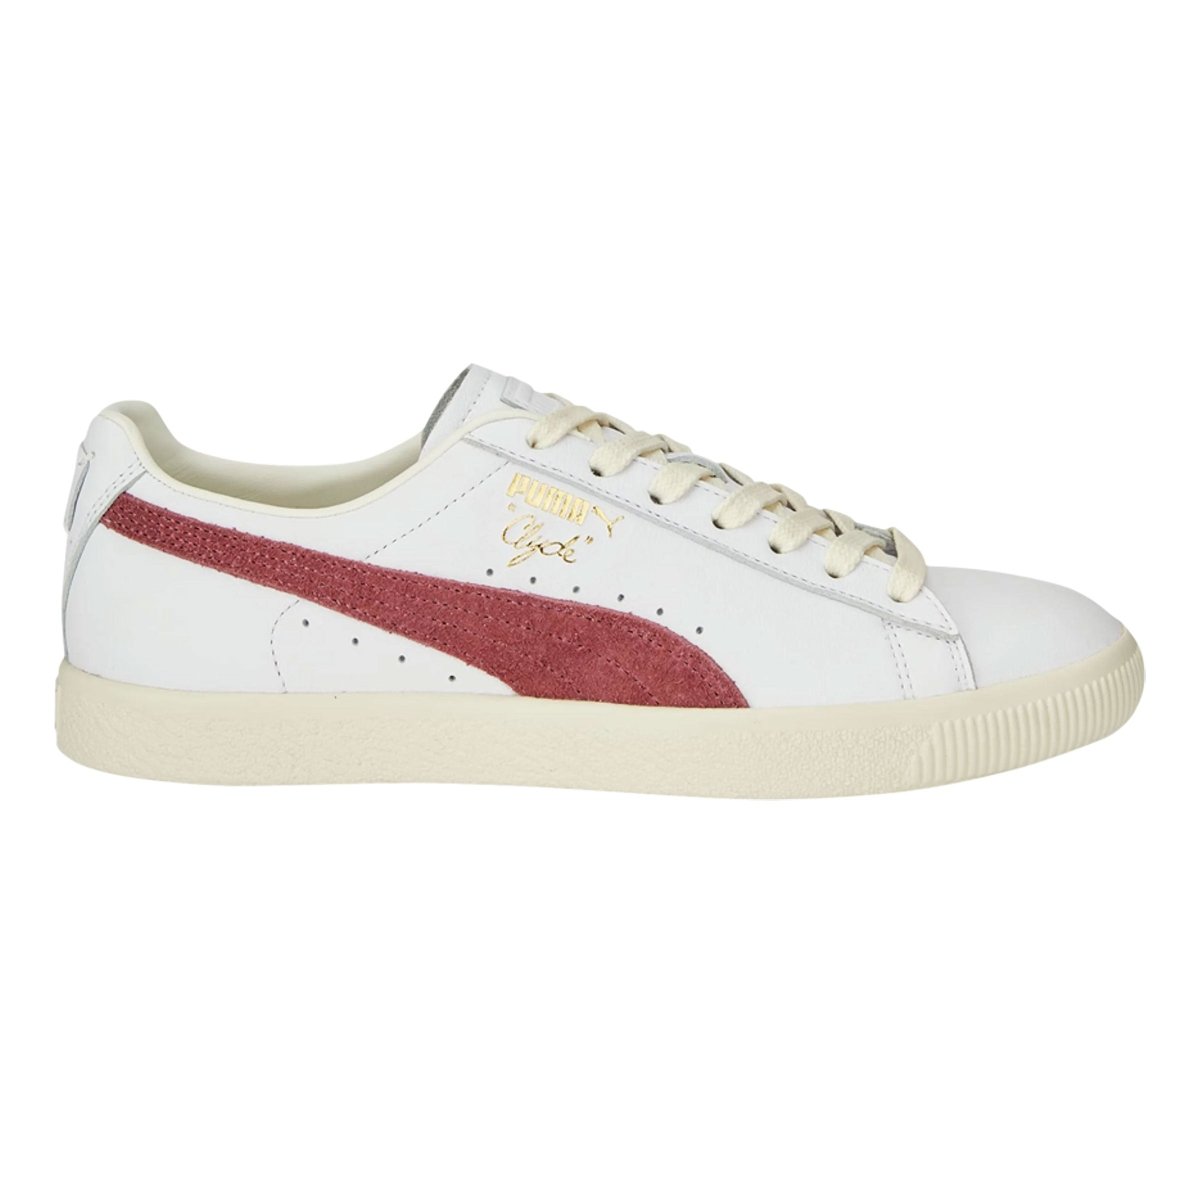 Puma Men's Clyde Base White/Wine - 10027623 - West NYC